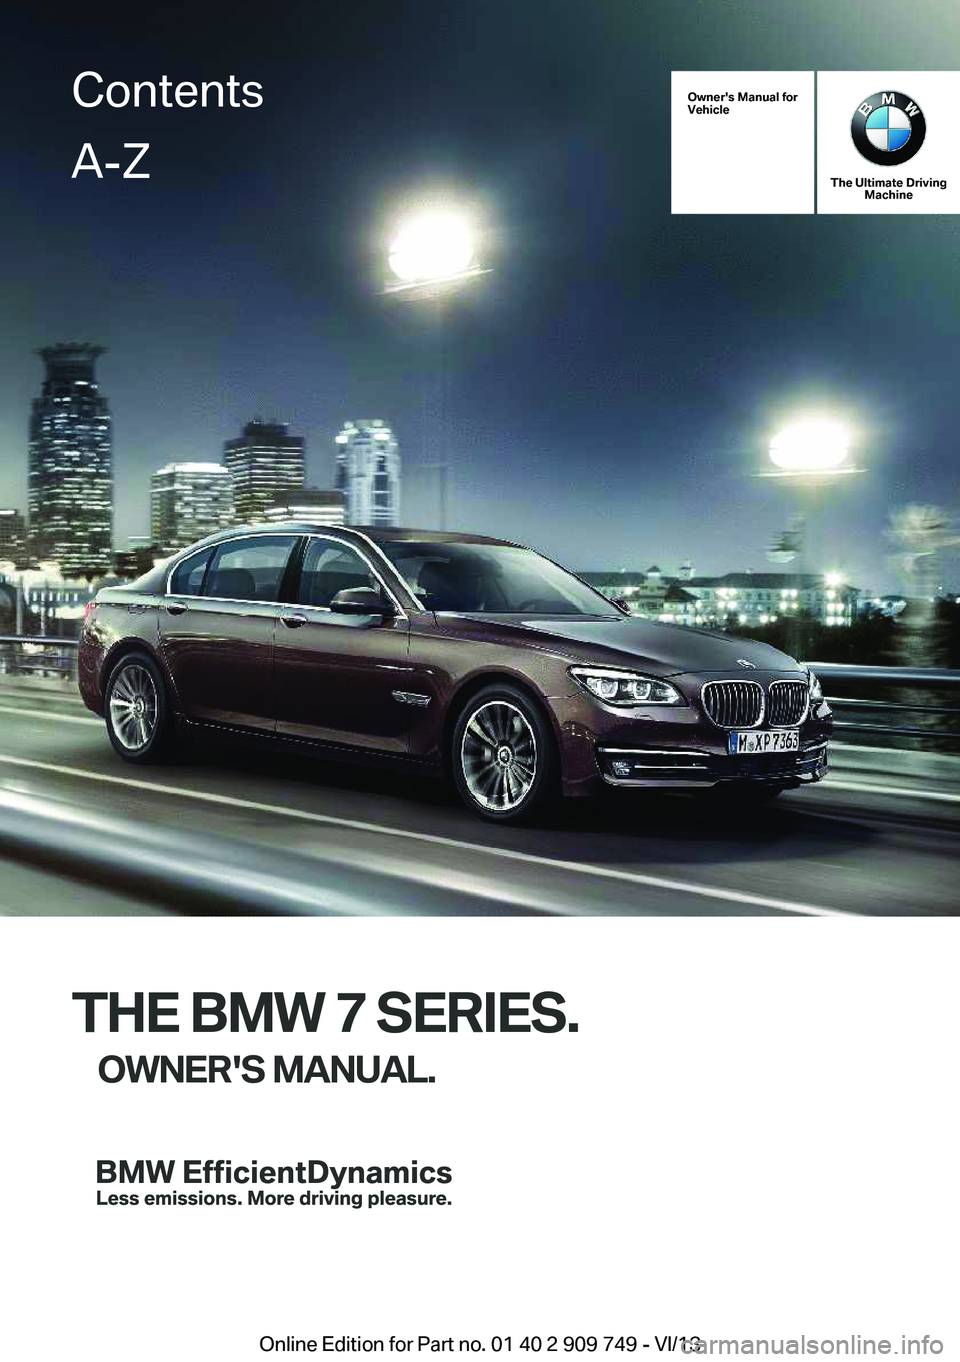 BMW 740LI XDRIVE 2014  Owners Manual Owner's Manual for
Vehicle
The Ultimate Driving Machine
THE BMW 7 SERIES.
OWNER'S MANUAL.
ContentsA-Z
Online Edition for Part no. 01 40 2 909 749 - VI/13   